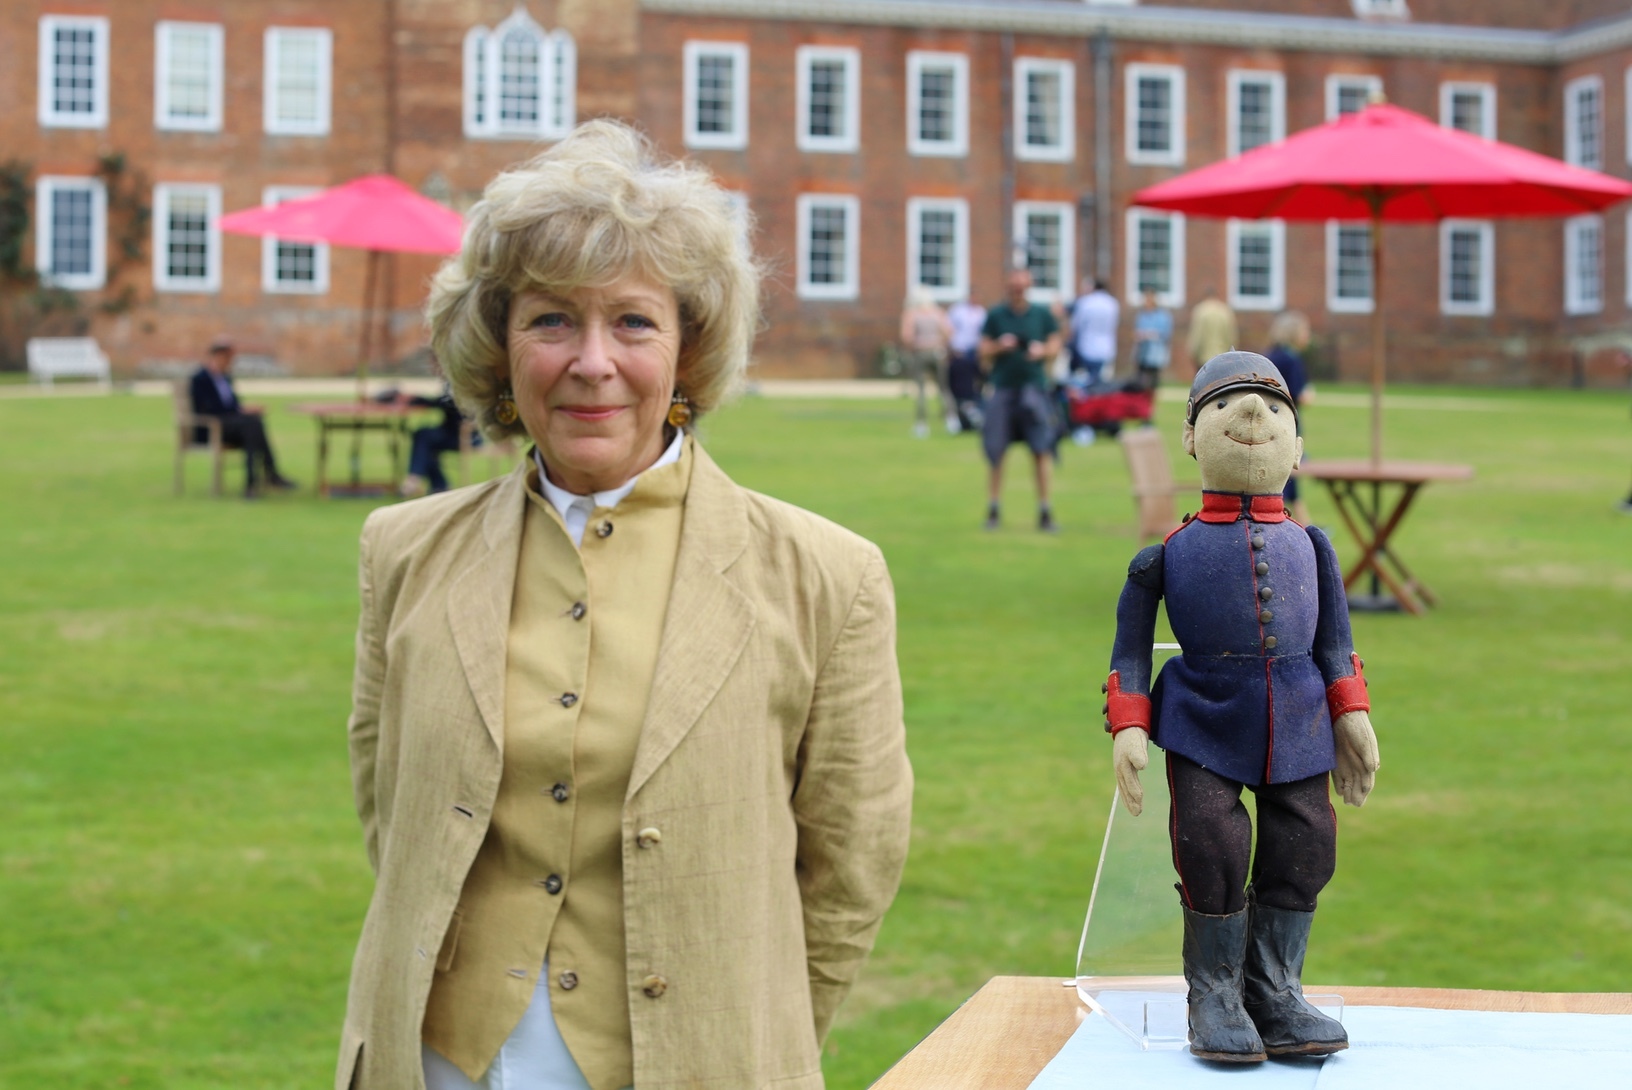 Stonor Park on Antiques Roadshow - Hilary Kay and solider doll